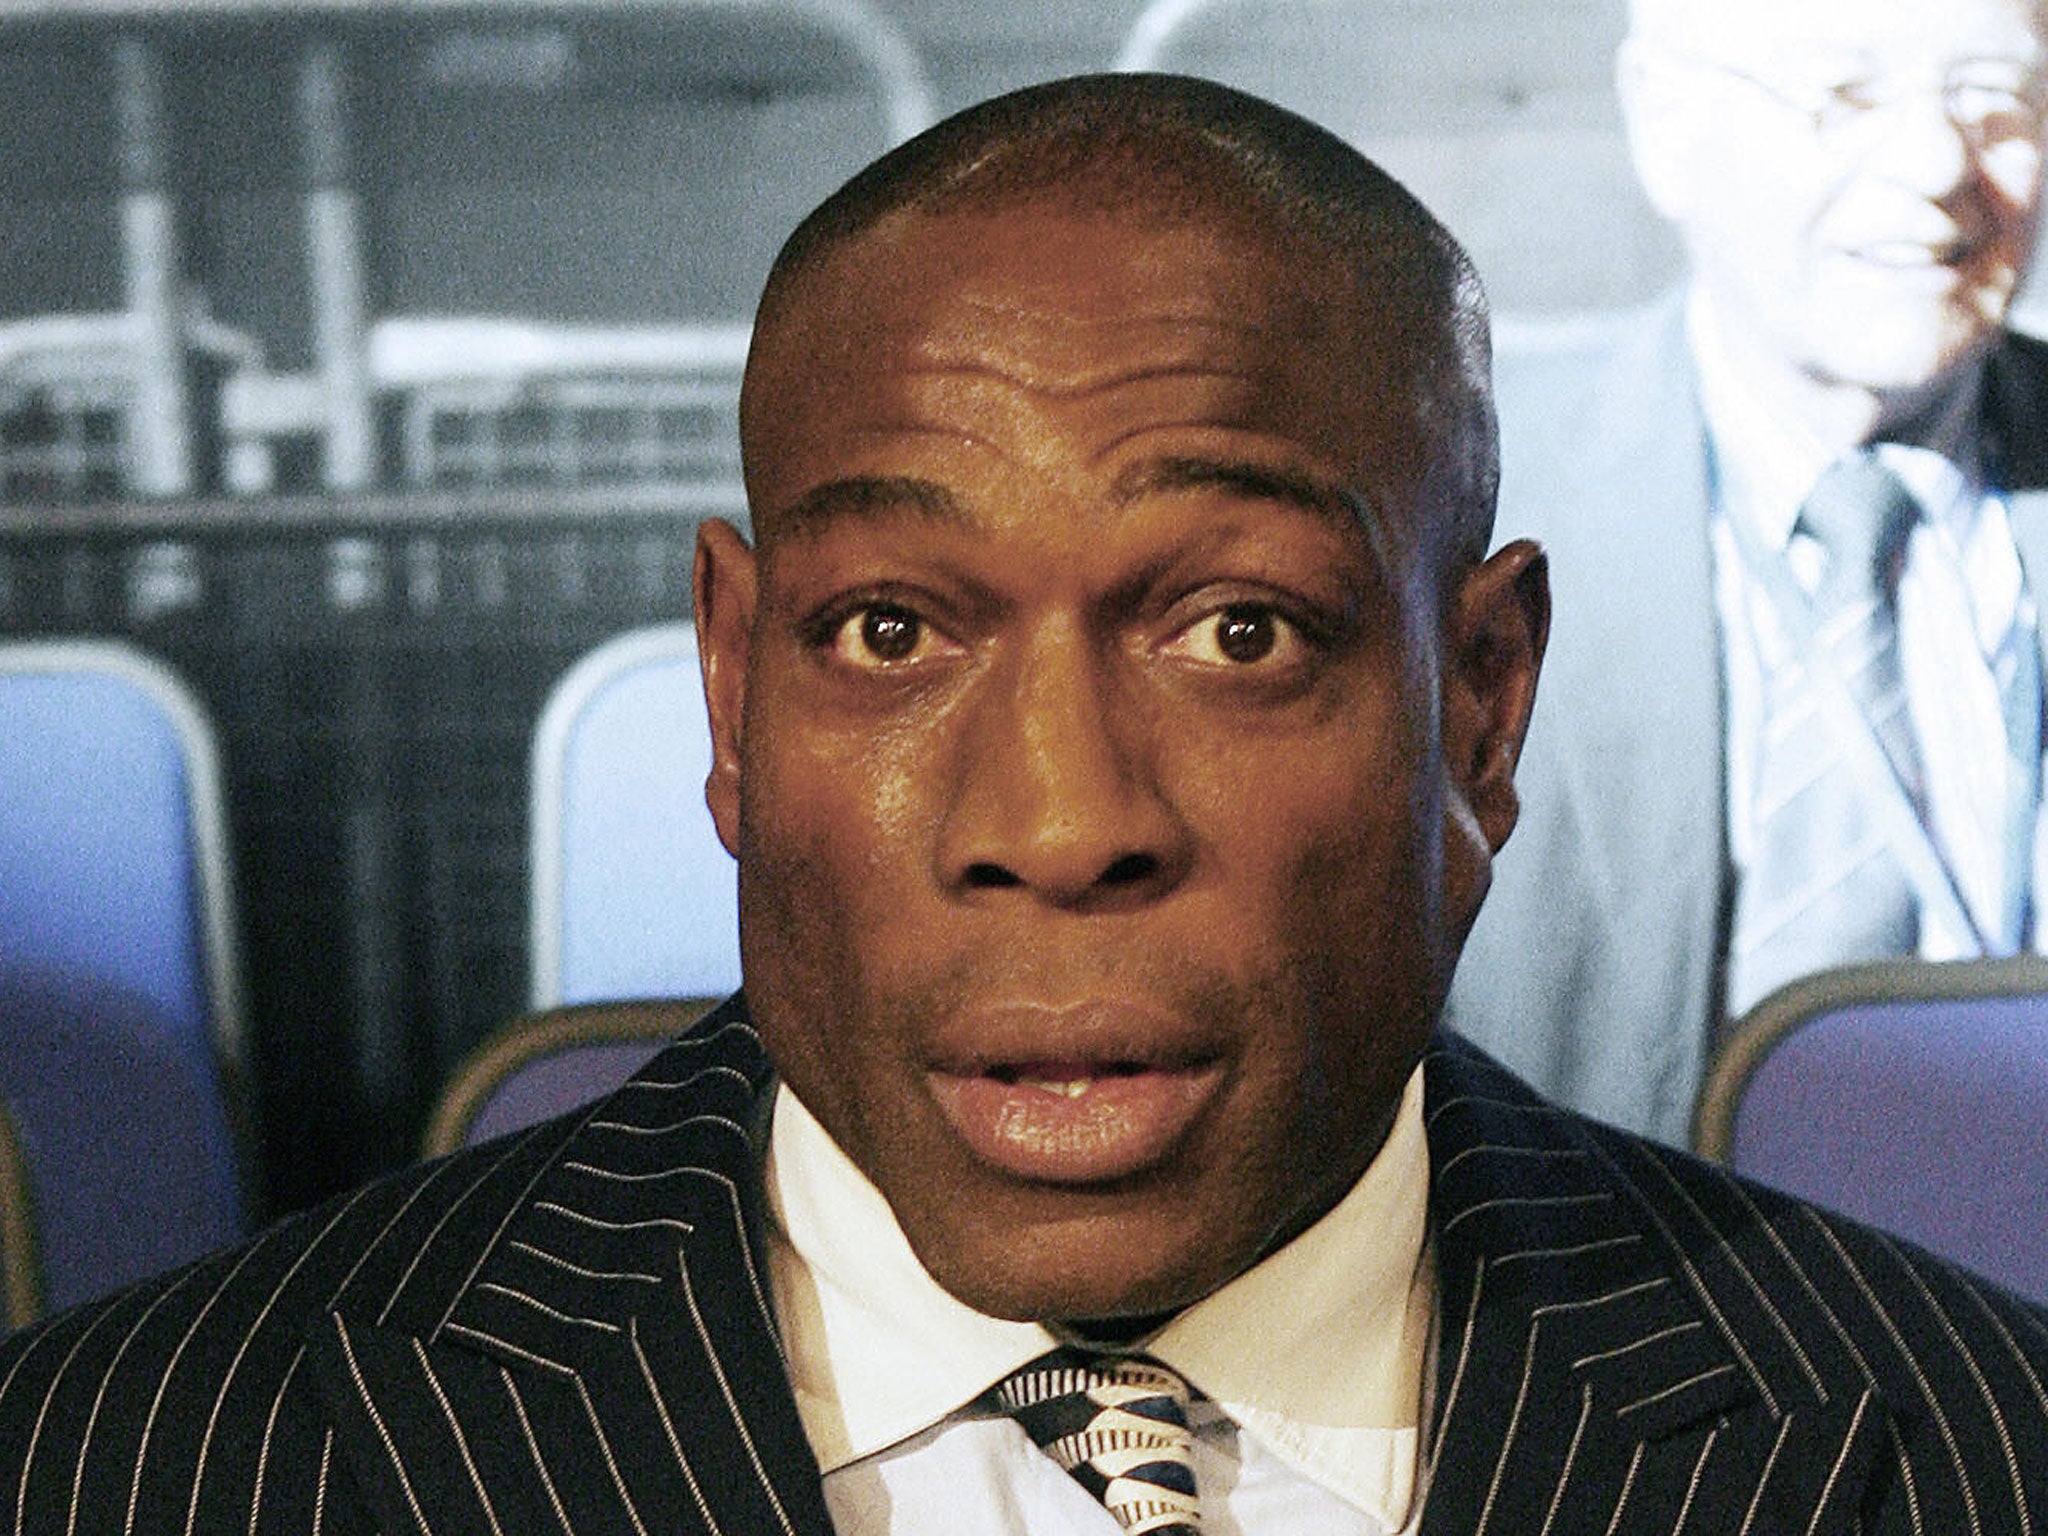 Frank Bruno is swapping his boxing gloves for hairdressers' scissors